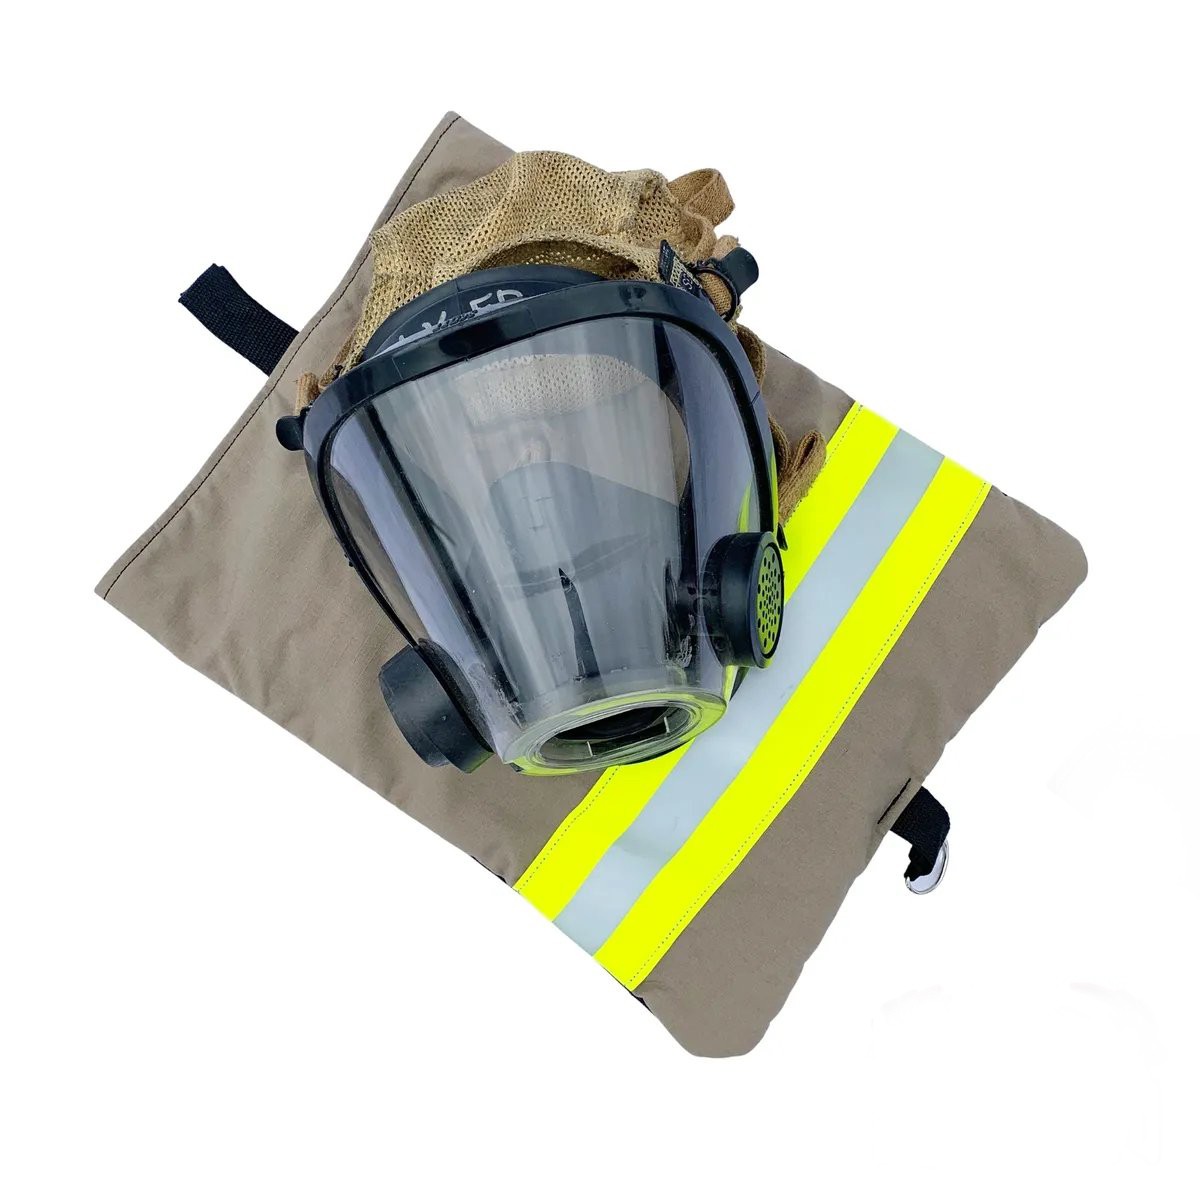 ❤️Buy 2 FREE SHIPPING❤️|Firefighter Personalized SCBA Mask Bag